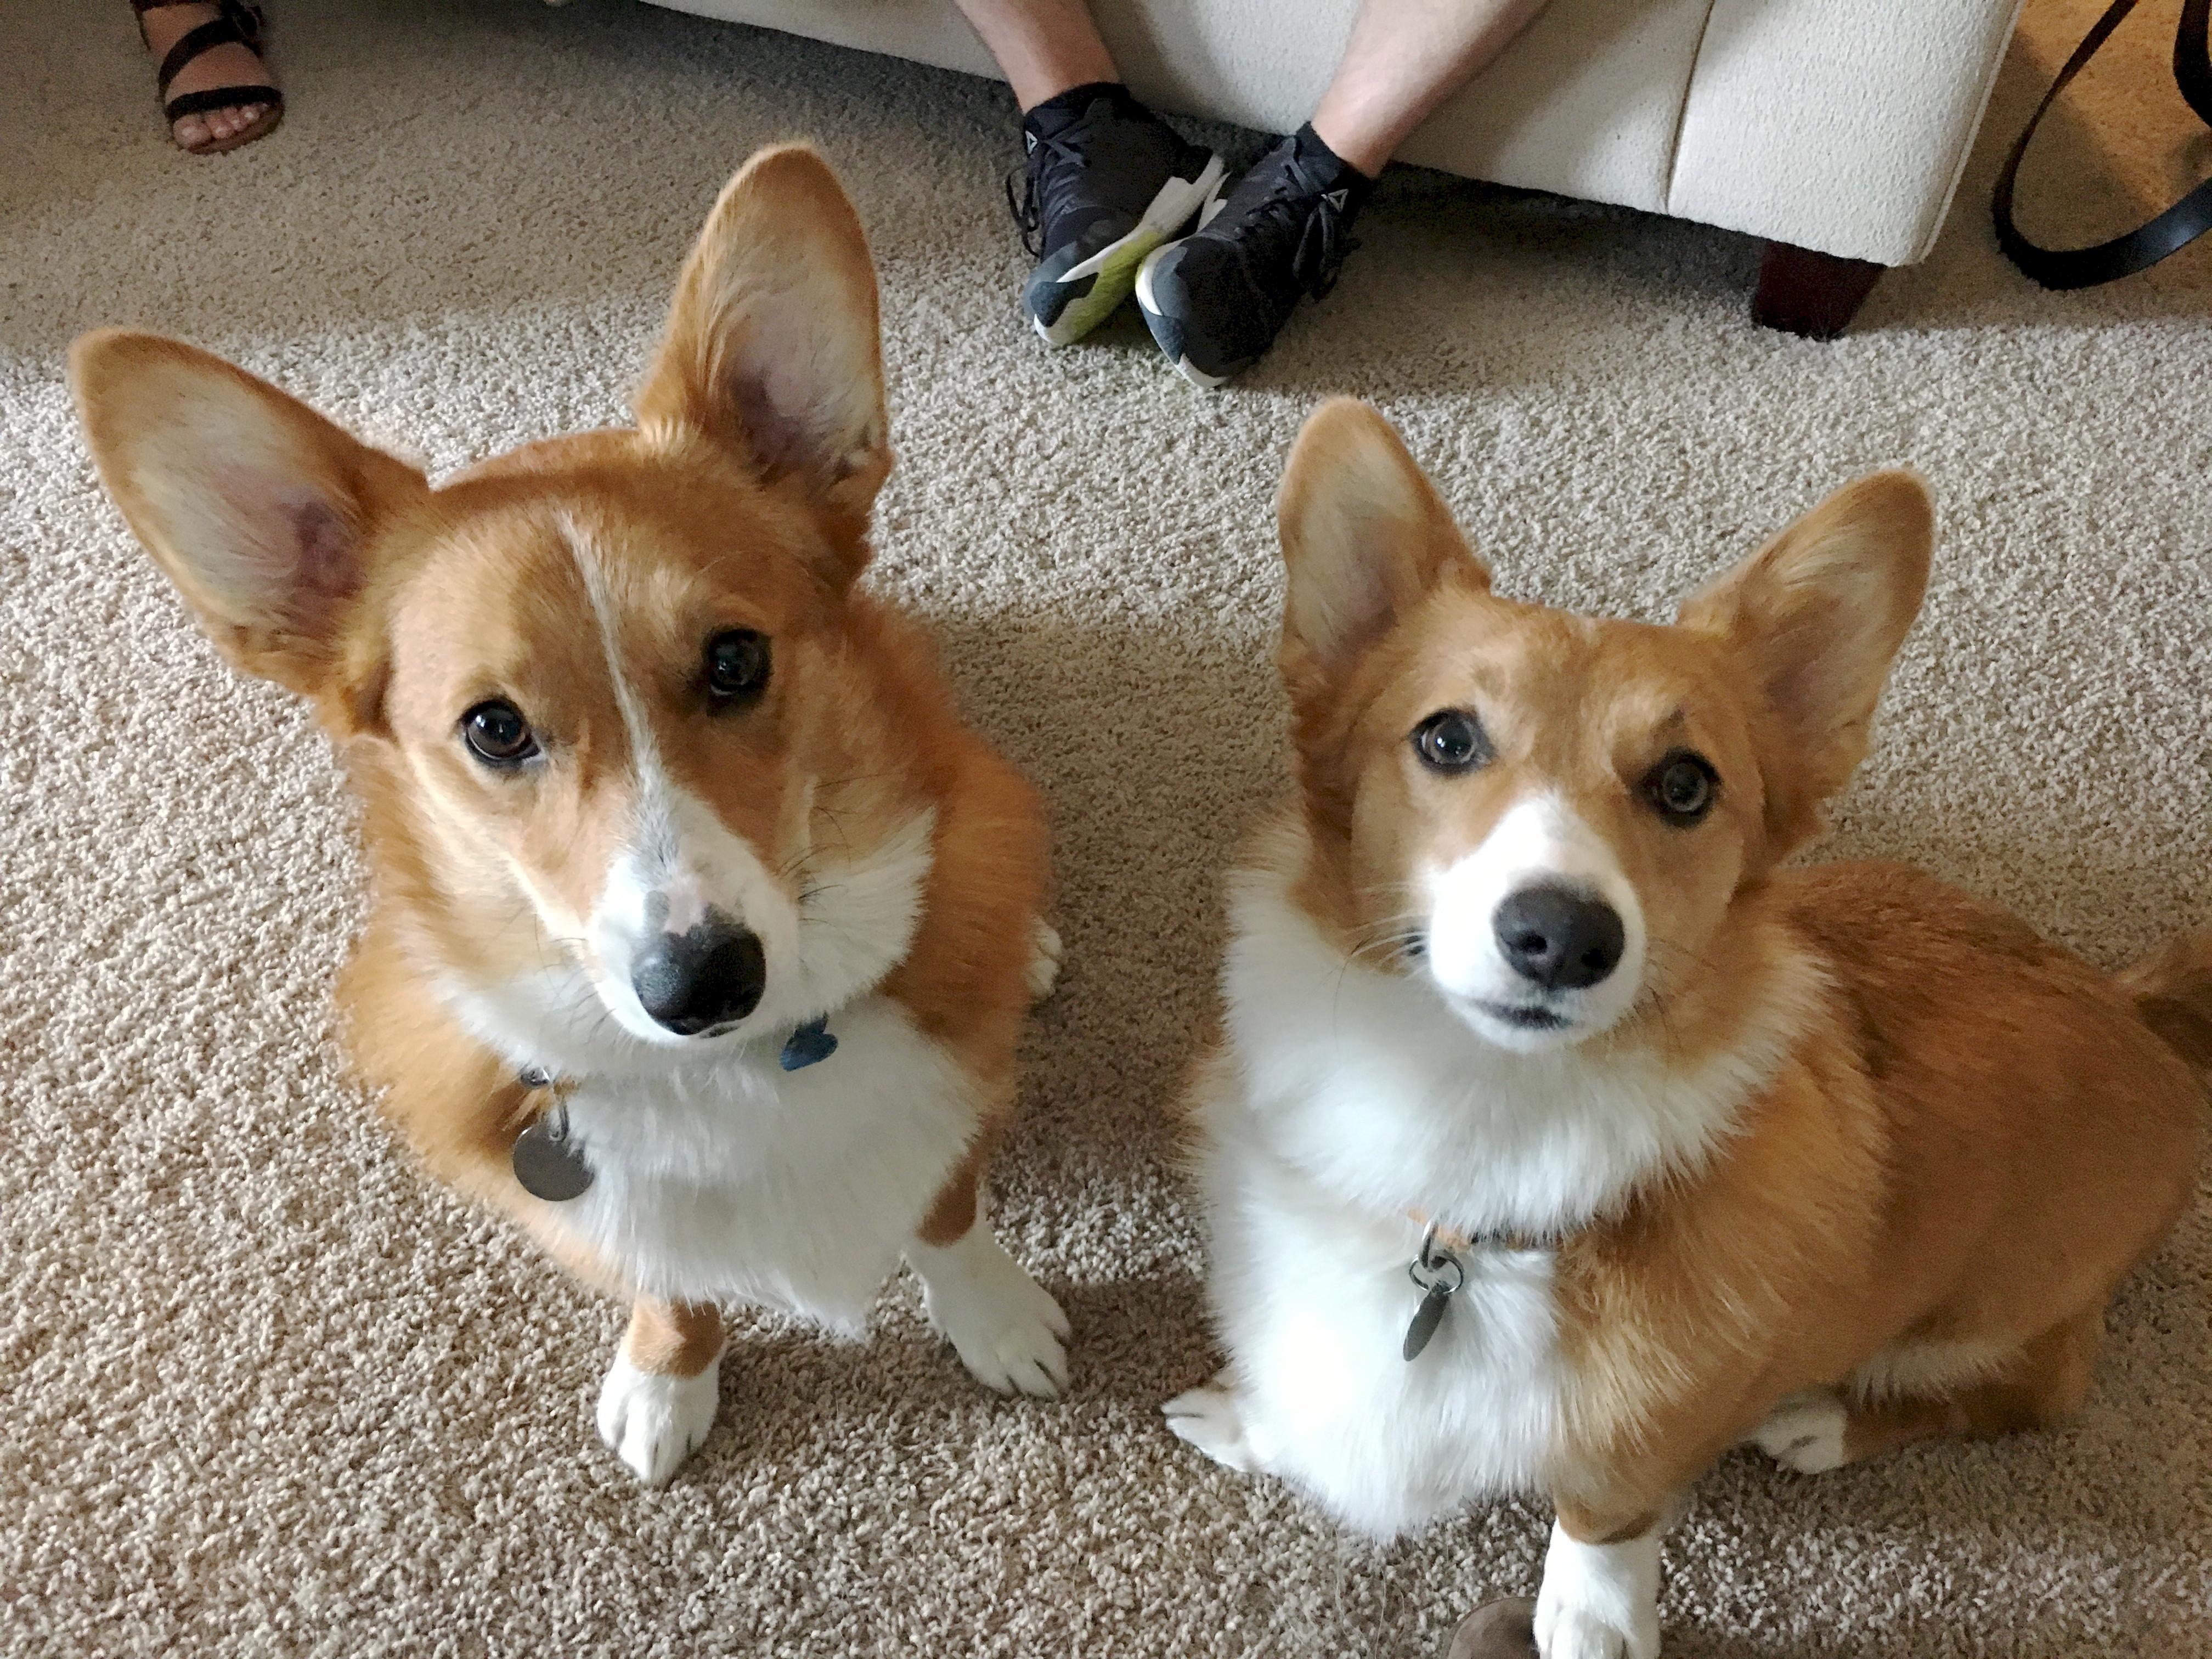 Fred and Olive - How to Stop a Corgi From Nipping People Who Touch His Paws